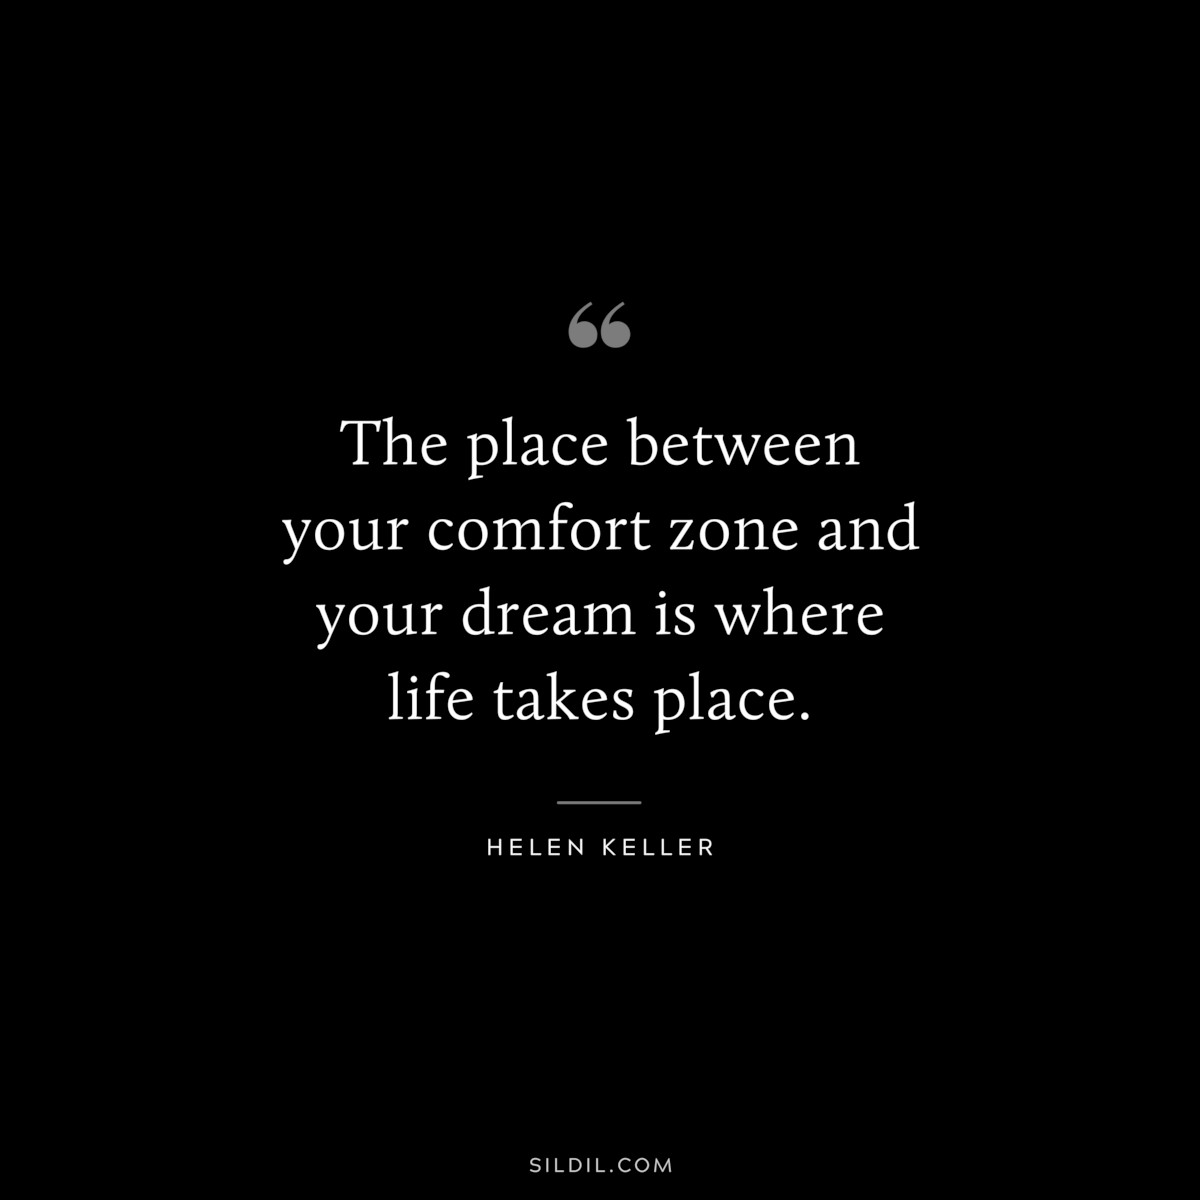 The place between your comfort zone and your dream is where life takes place. ― Helen Keller